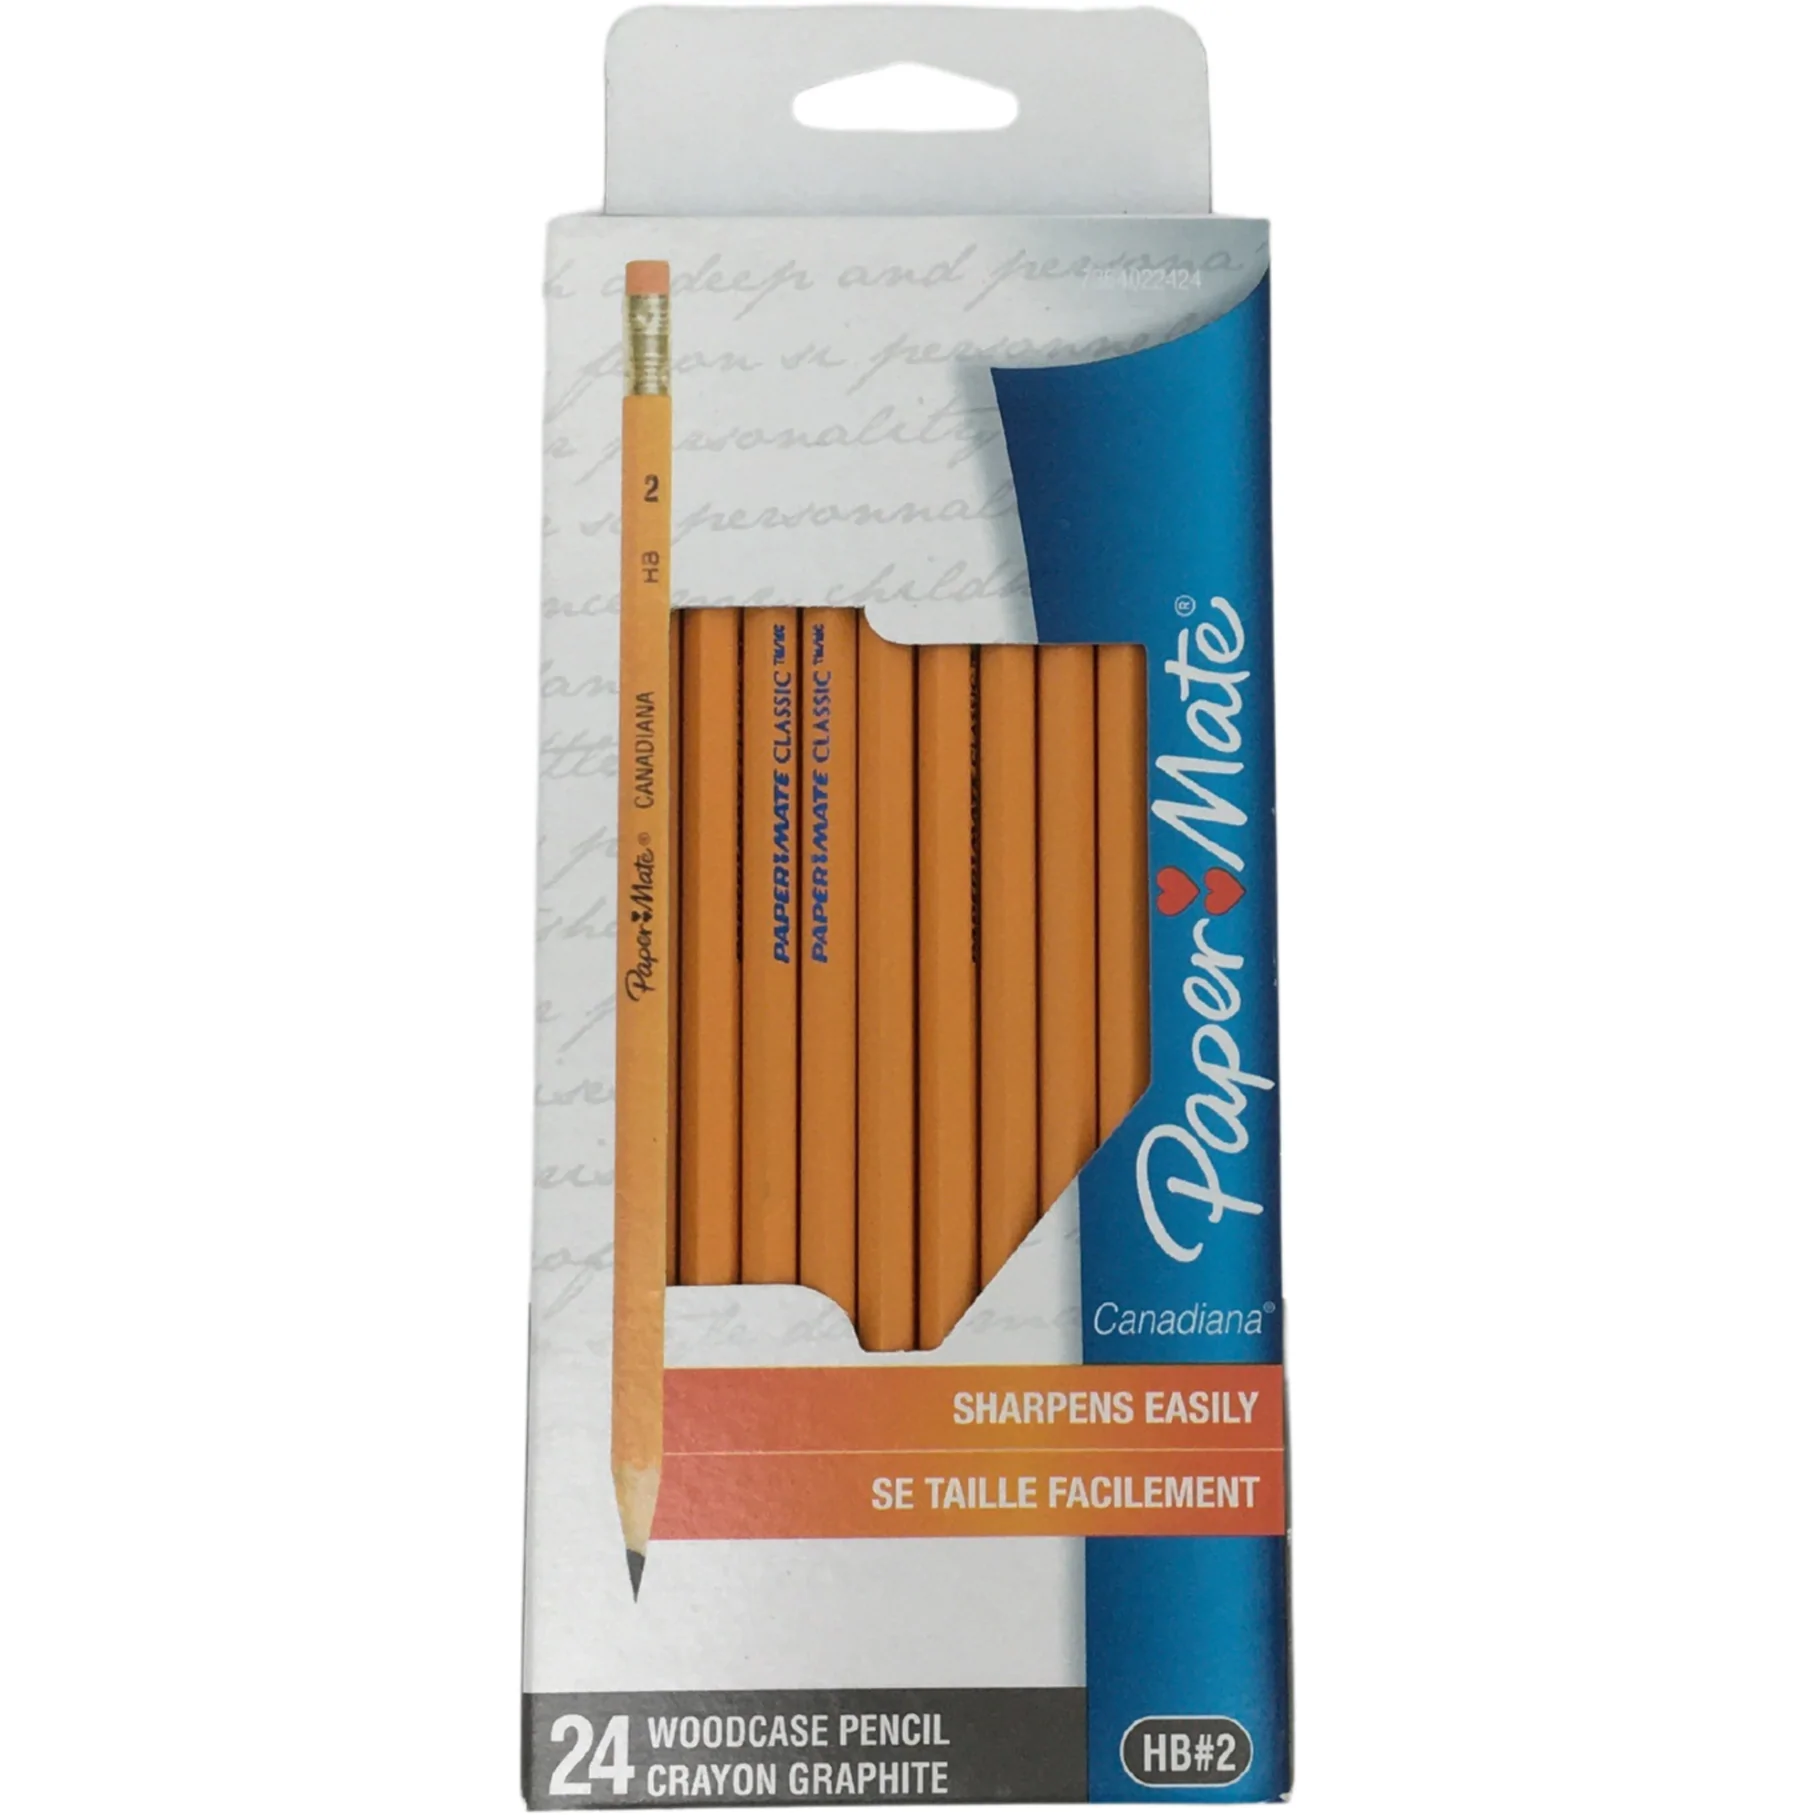 Paper Mate HB #2 Woodcase Pencil / 24 Pack / Yellow